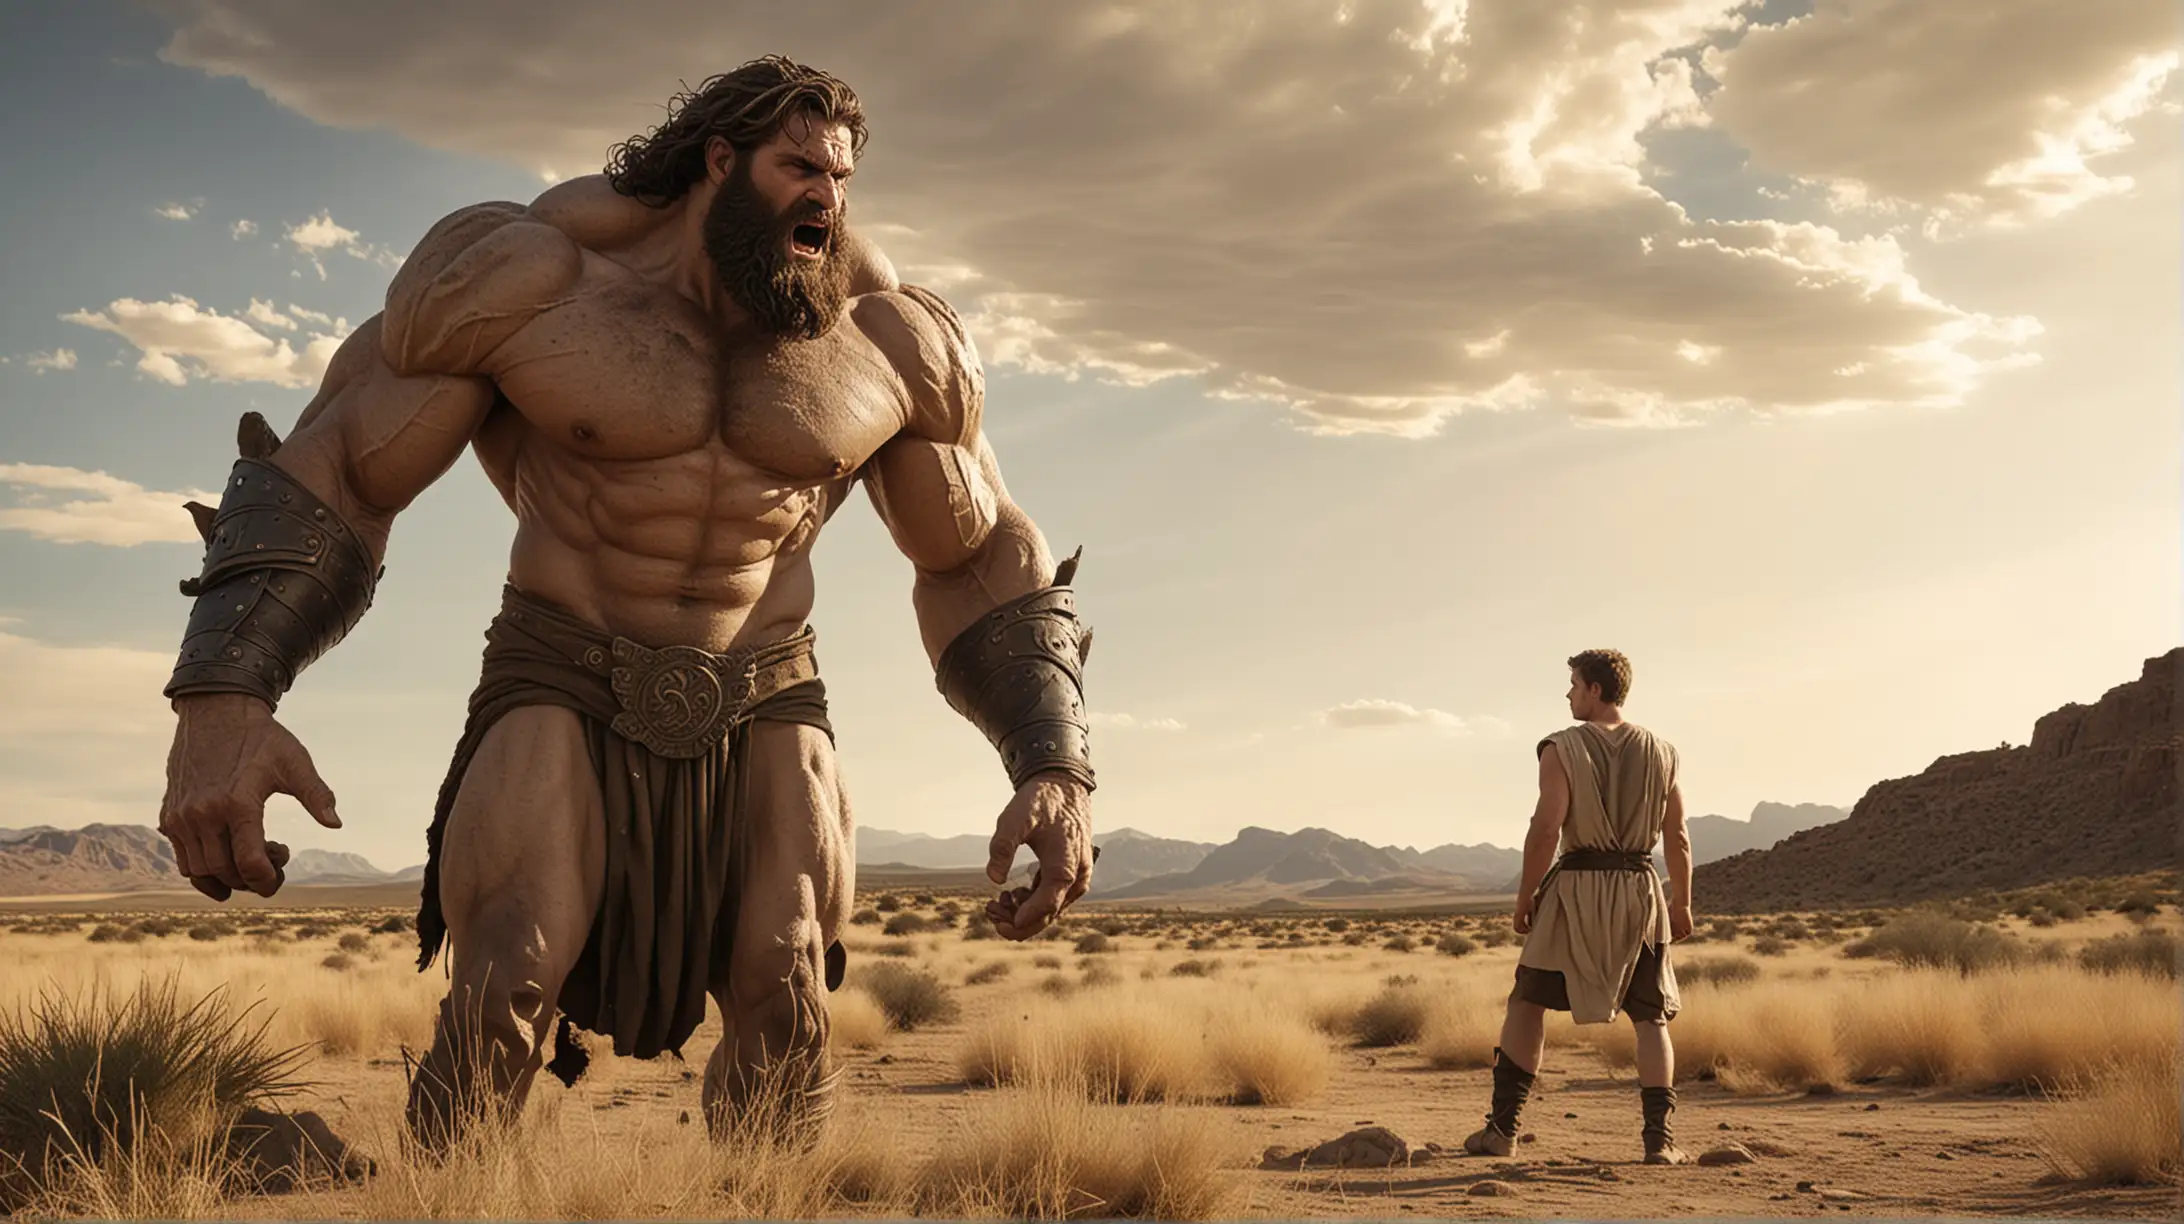 A Biblical Giant Goliath facing a handsome 25 year old man . Set in the Desert Fields, During the Biblical Era of Samuel.